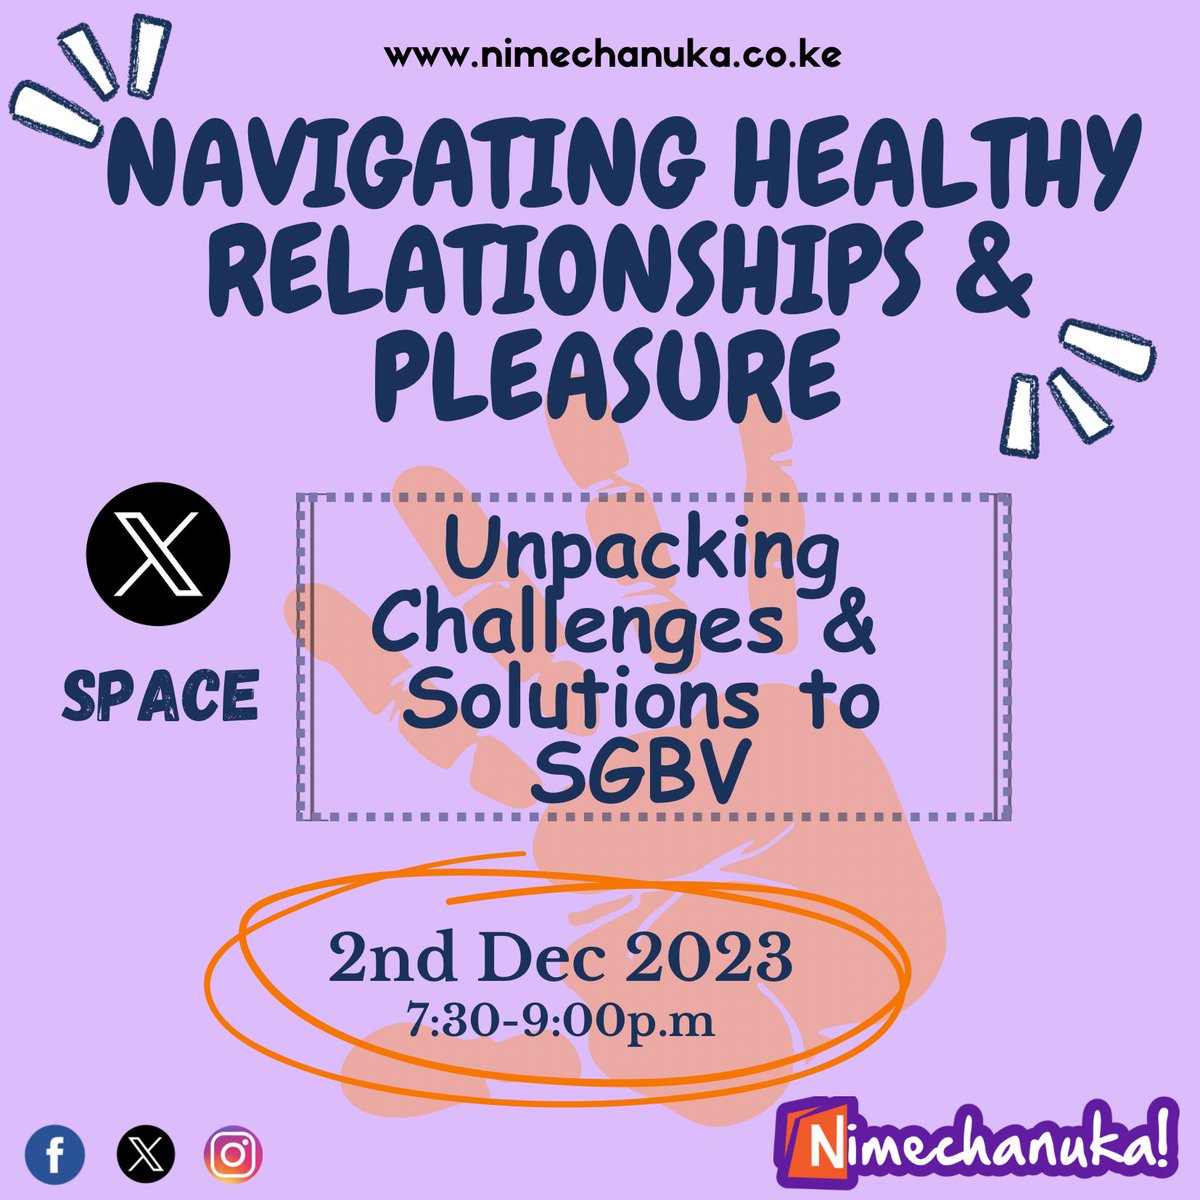 Join our vital conversation on healthy relationships and pleasure amidst the challenges of Sexual and Gender-Based Violence (SGBV) during the 16 Days of Activism. Let's unpack solutions together! #16DaysOfActivism #16DaysOfActivism2023 #16DaysOfActivismAgainstGBV